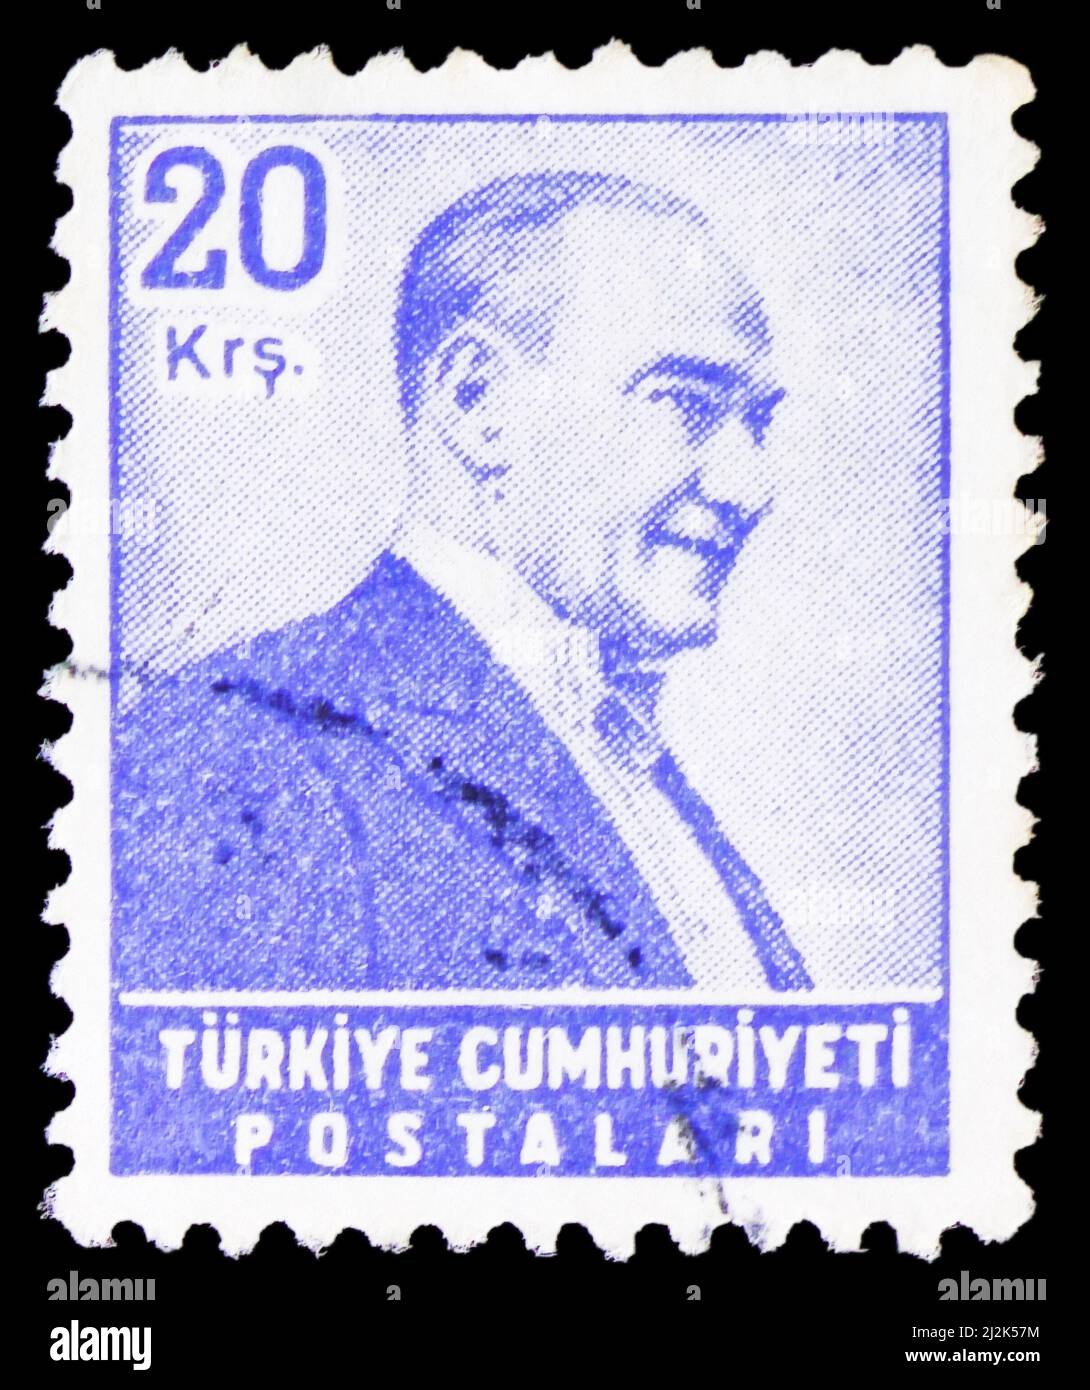 MOSCOW, RUSSIA - MARCH 13, 2022: Postage stamp printed in Turkey shows Kemal Ataturk, Definitive Postage Stamps, 1955-6, Ataturk serie, circa 1955 Stock Photo